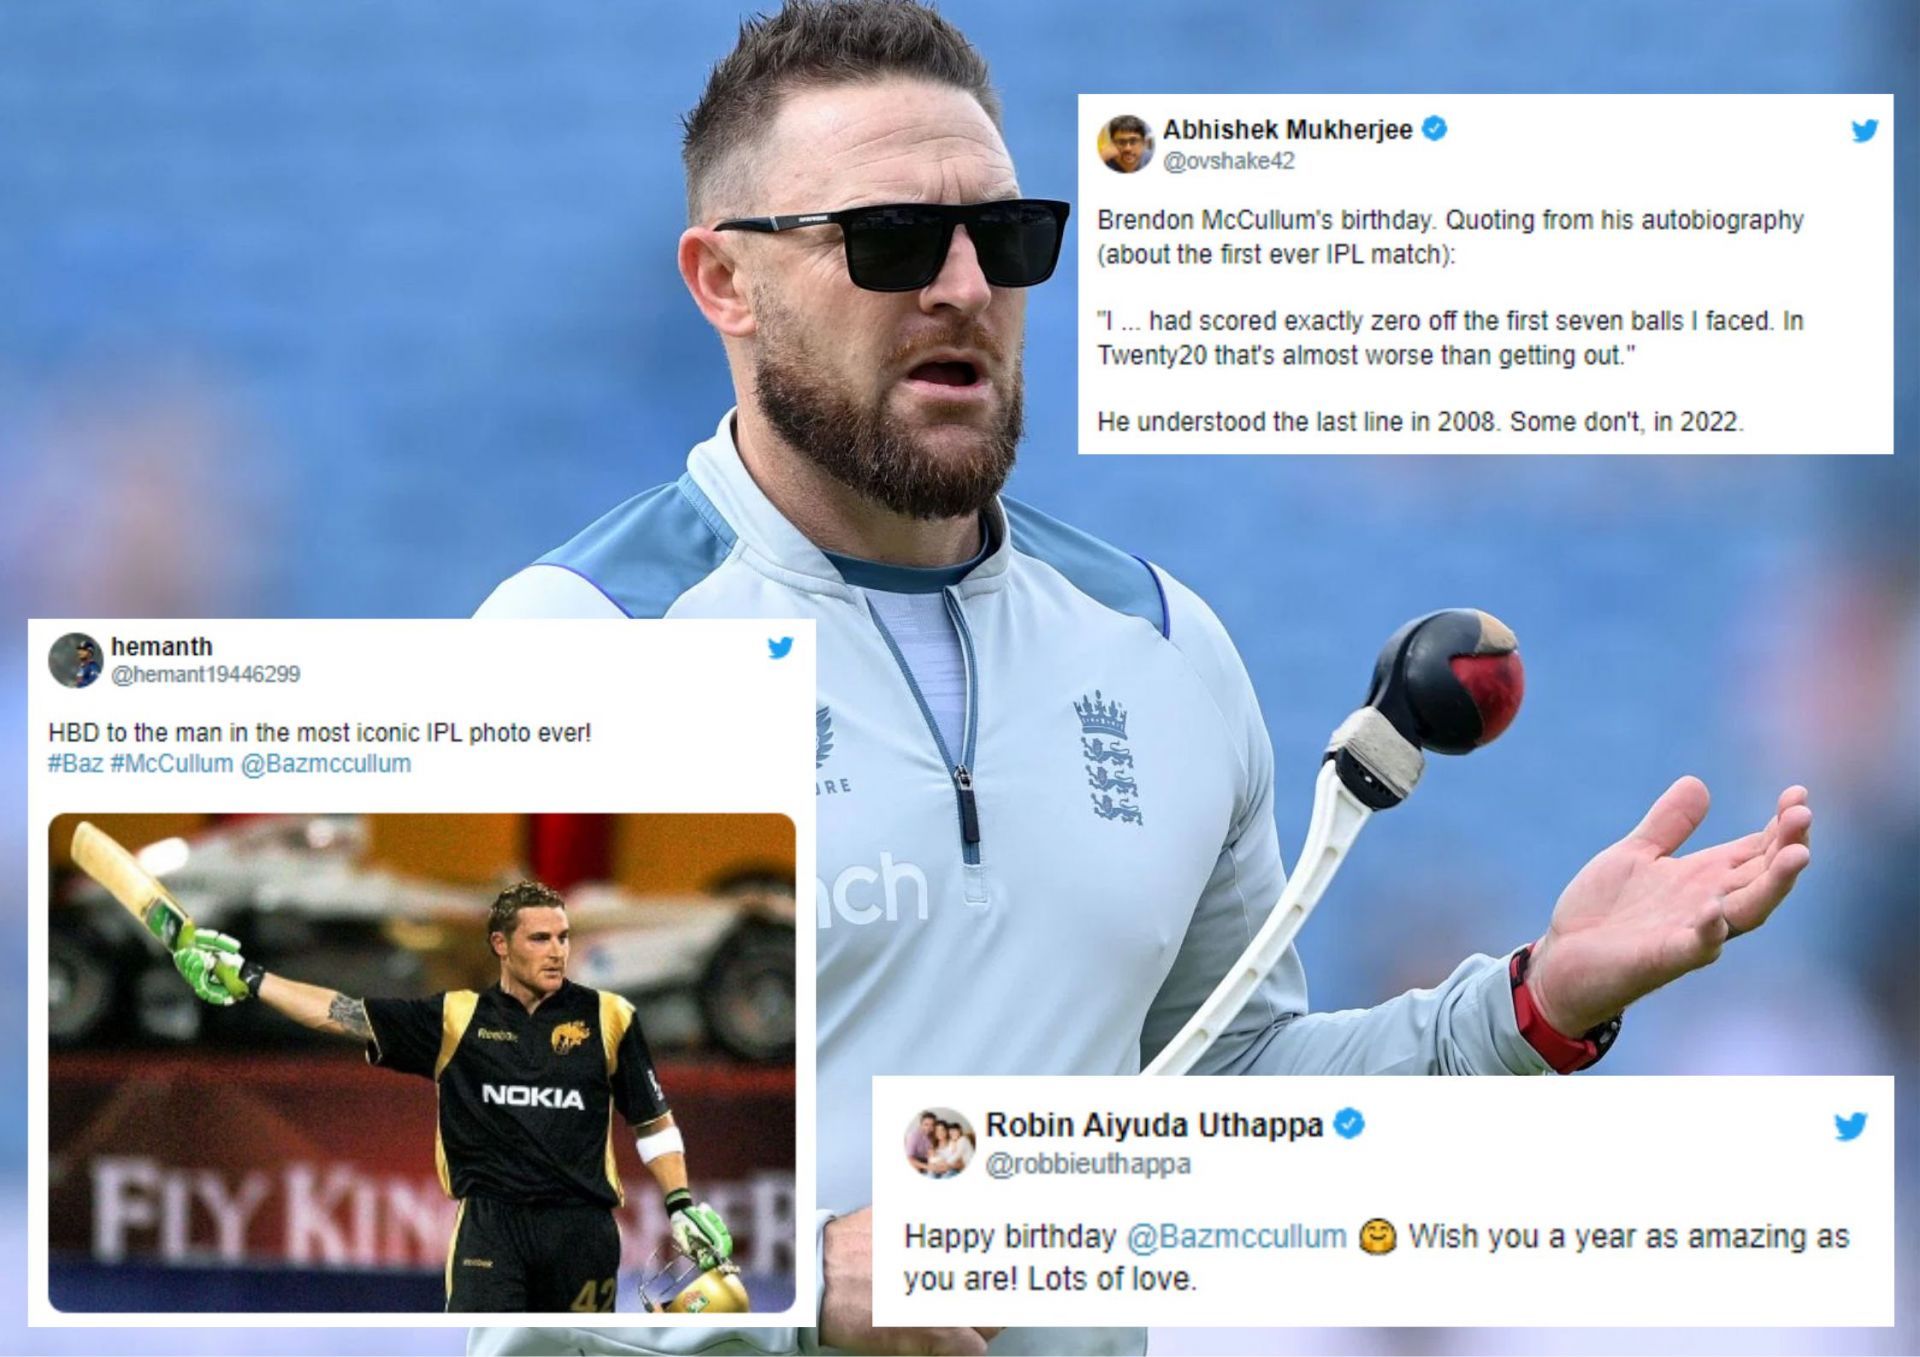 Twitterati showered wishes on Brendon McCullum, who turned 41 today!